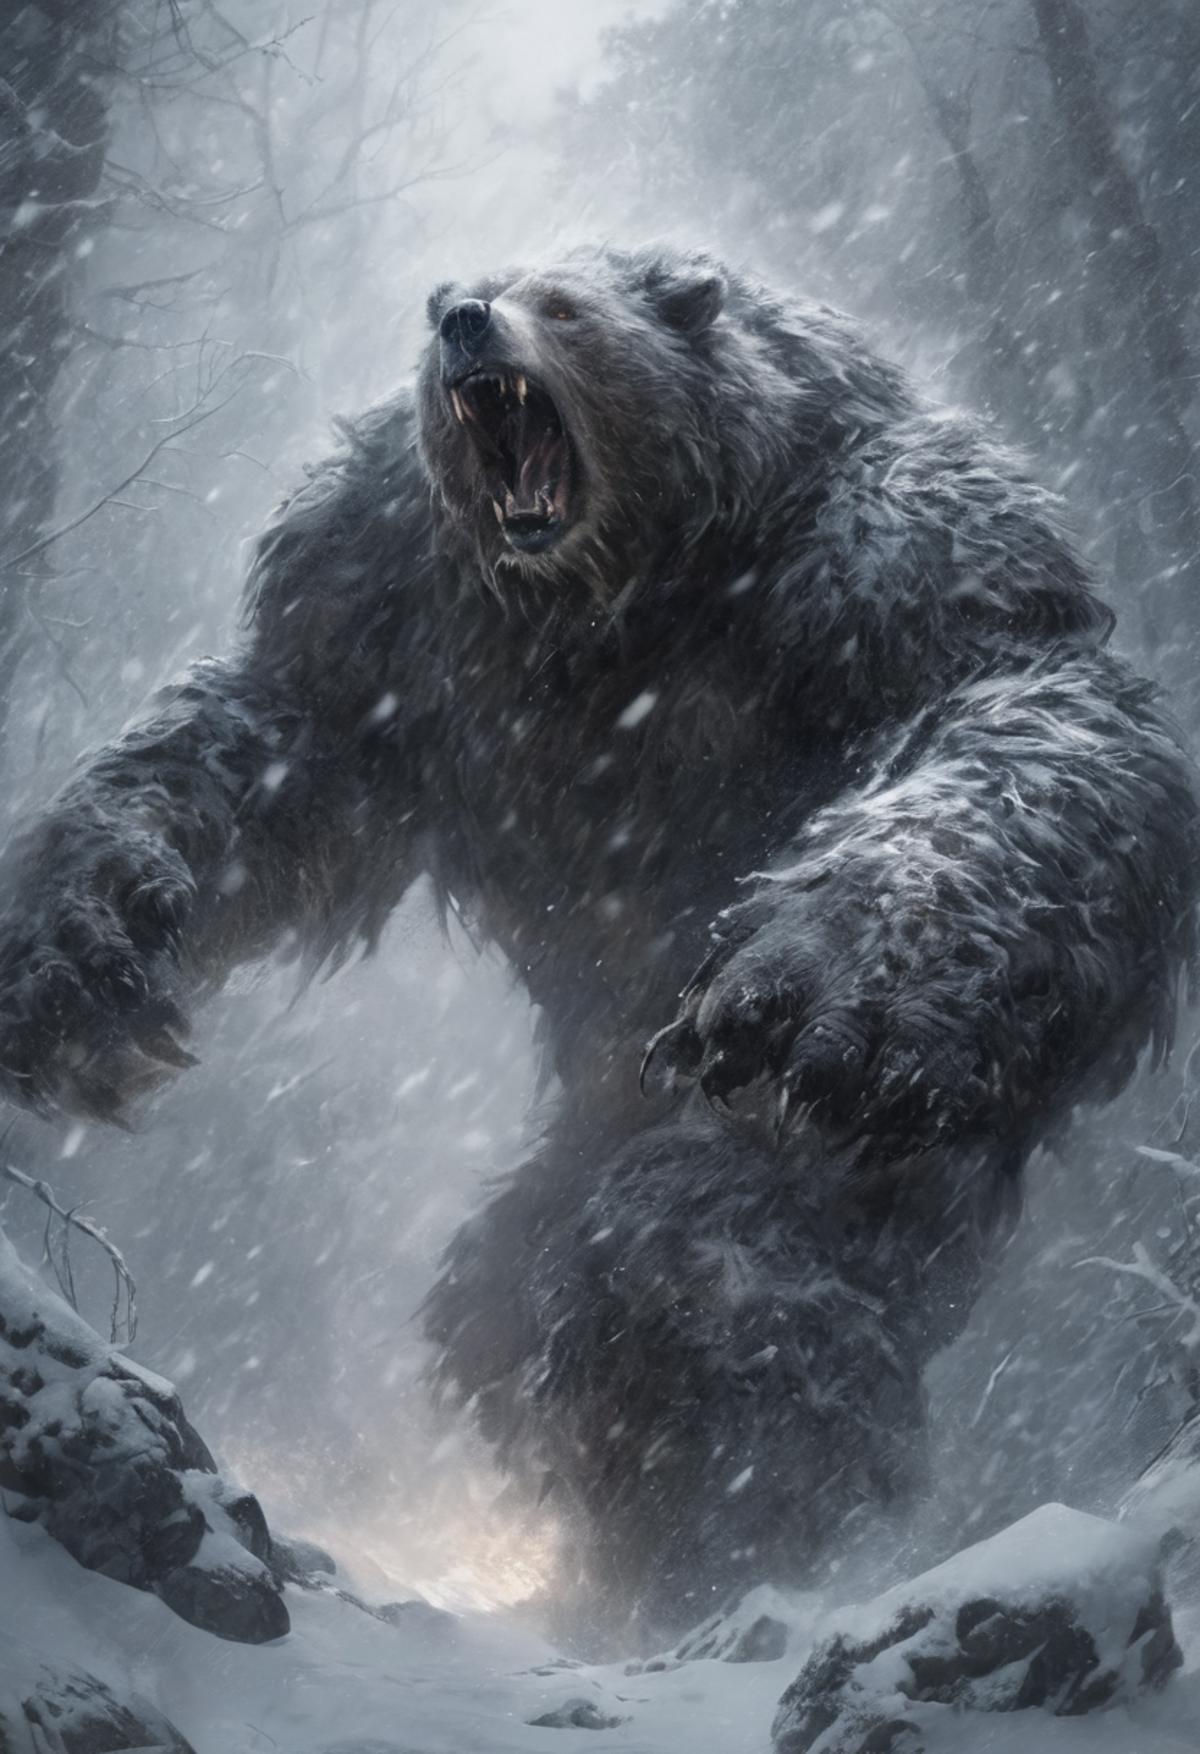 A roaring, snow-covered bear in the woods.